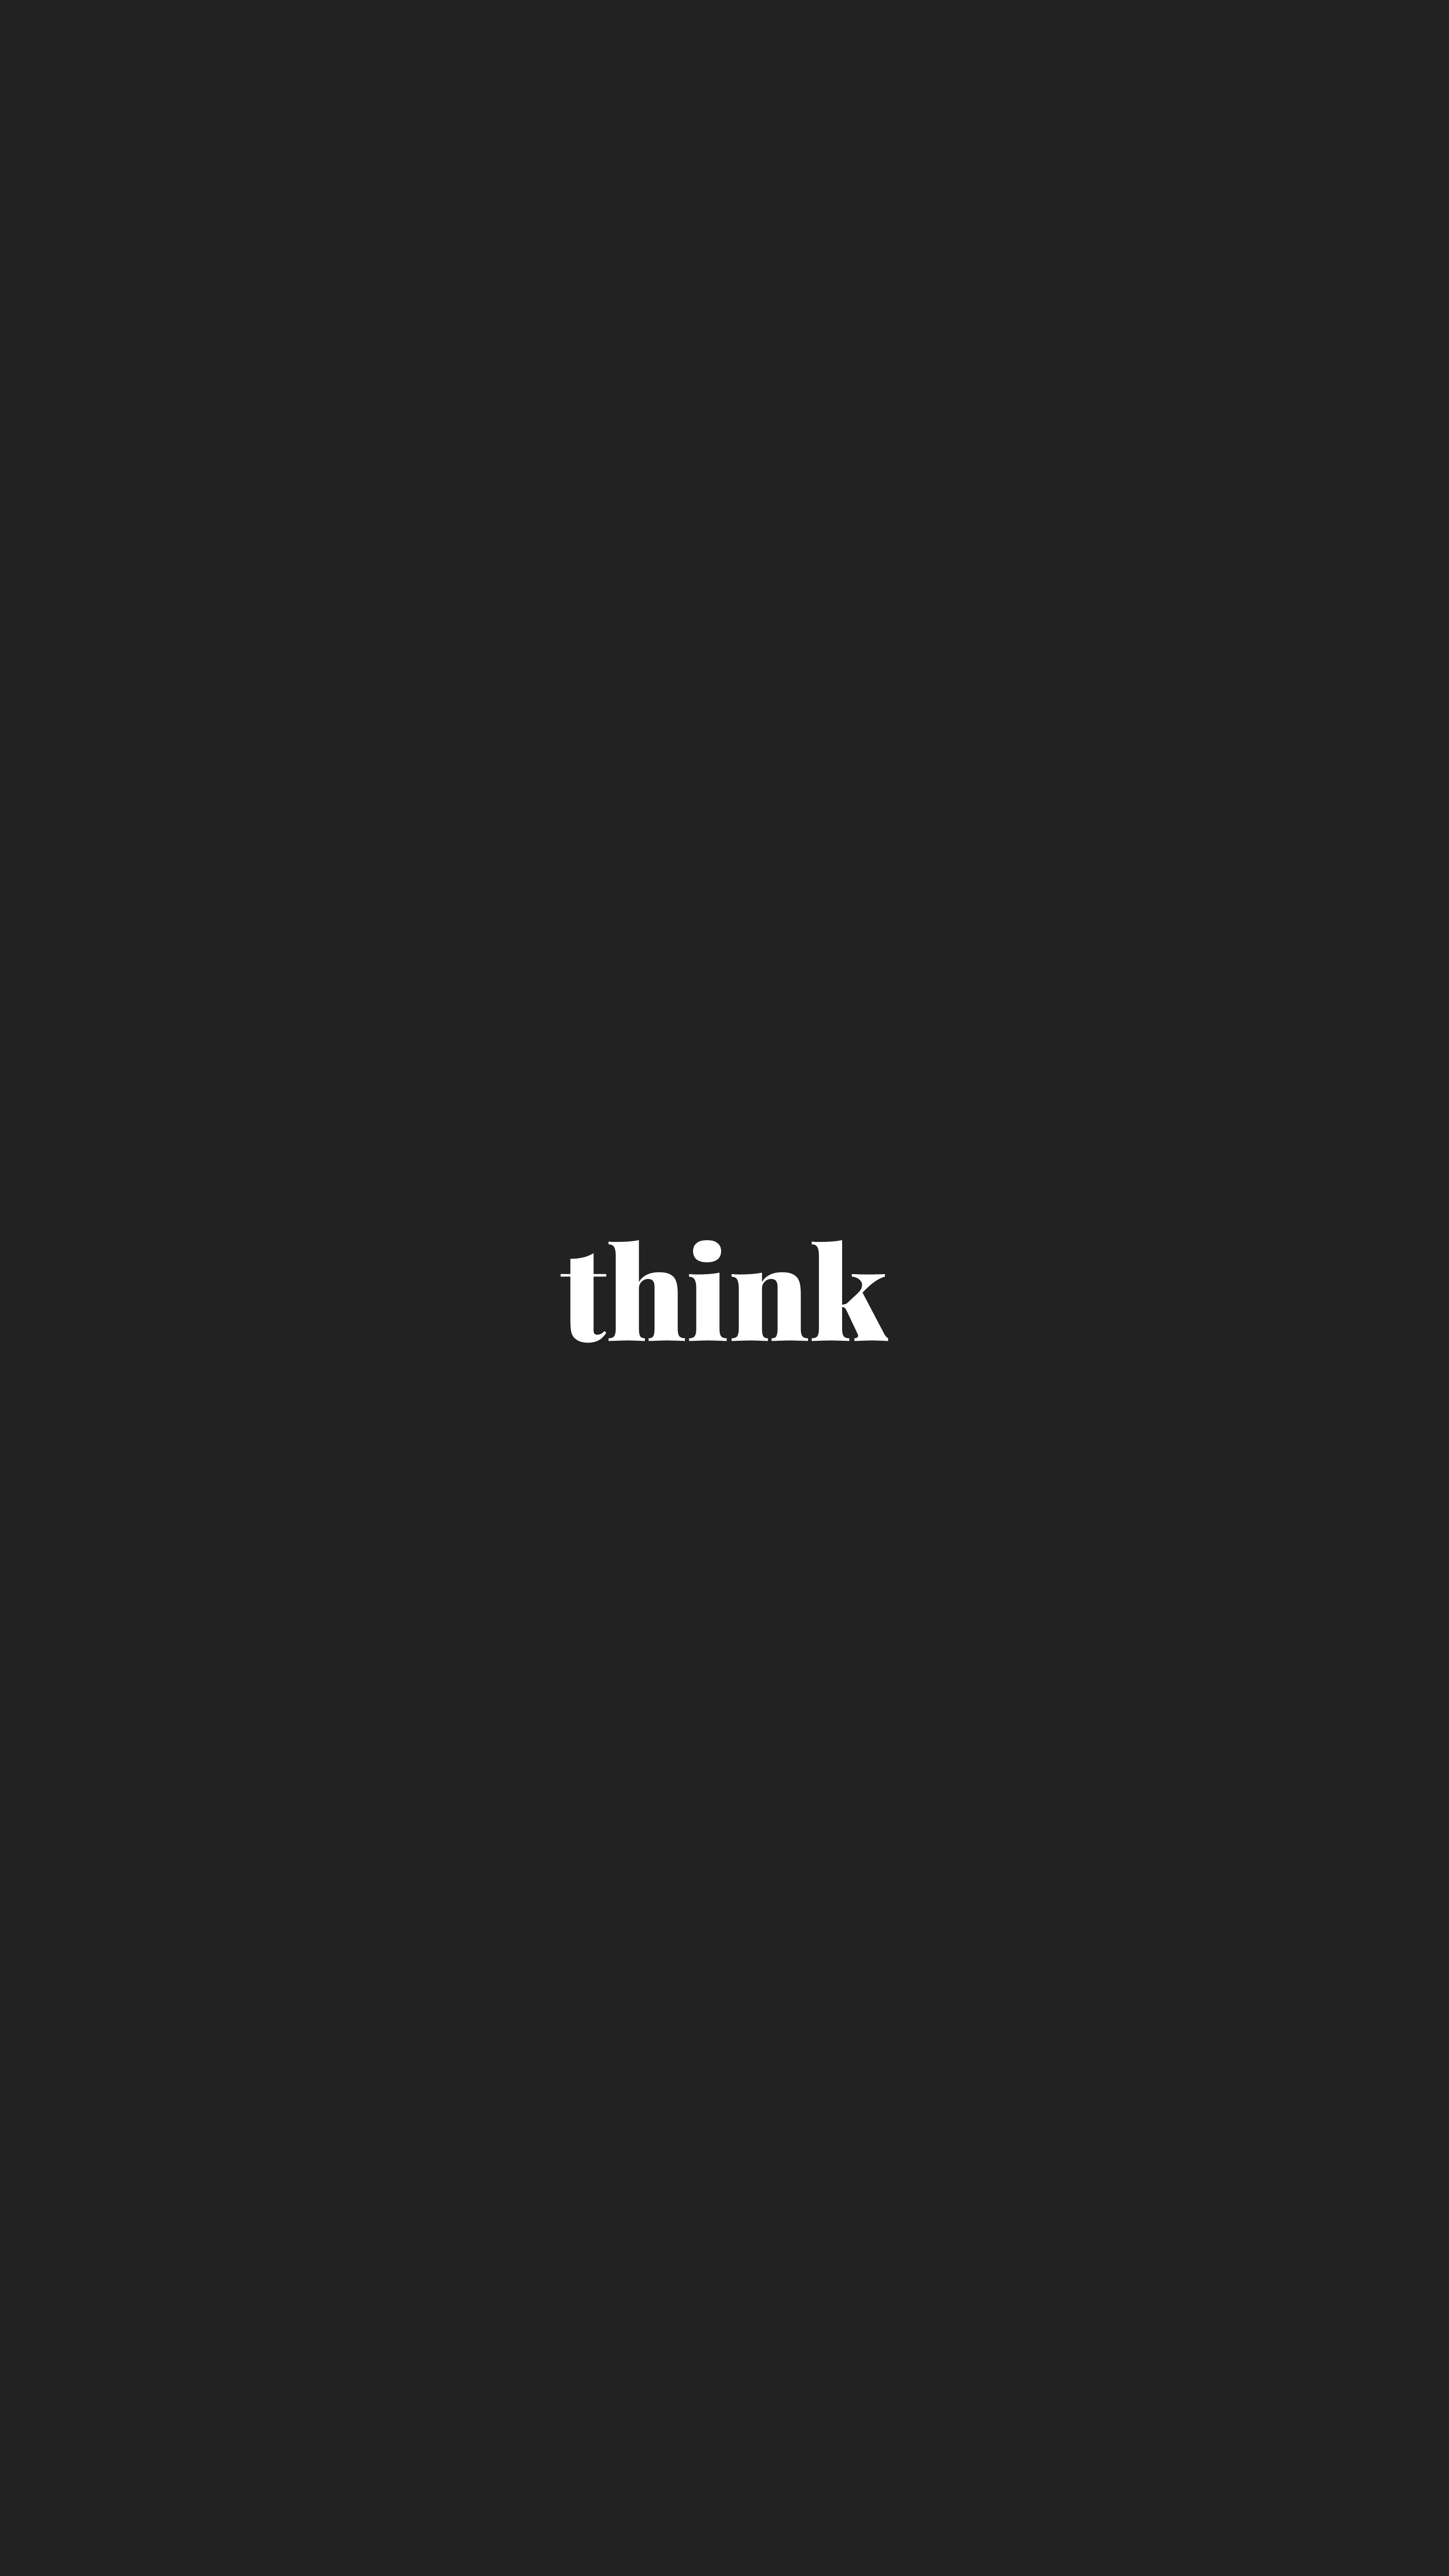 text, words, minimalism, word, think wallpaper for mobile